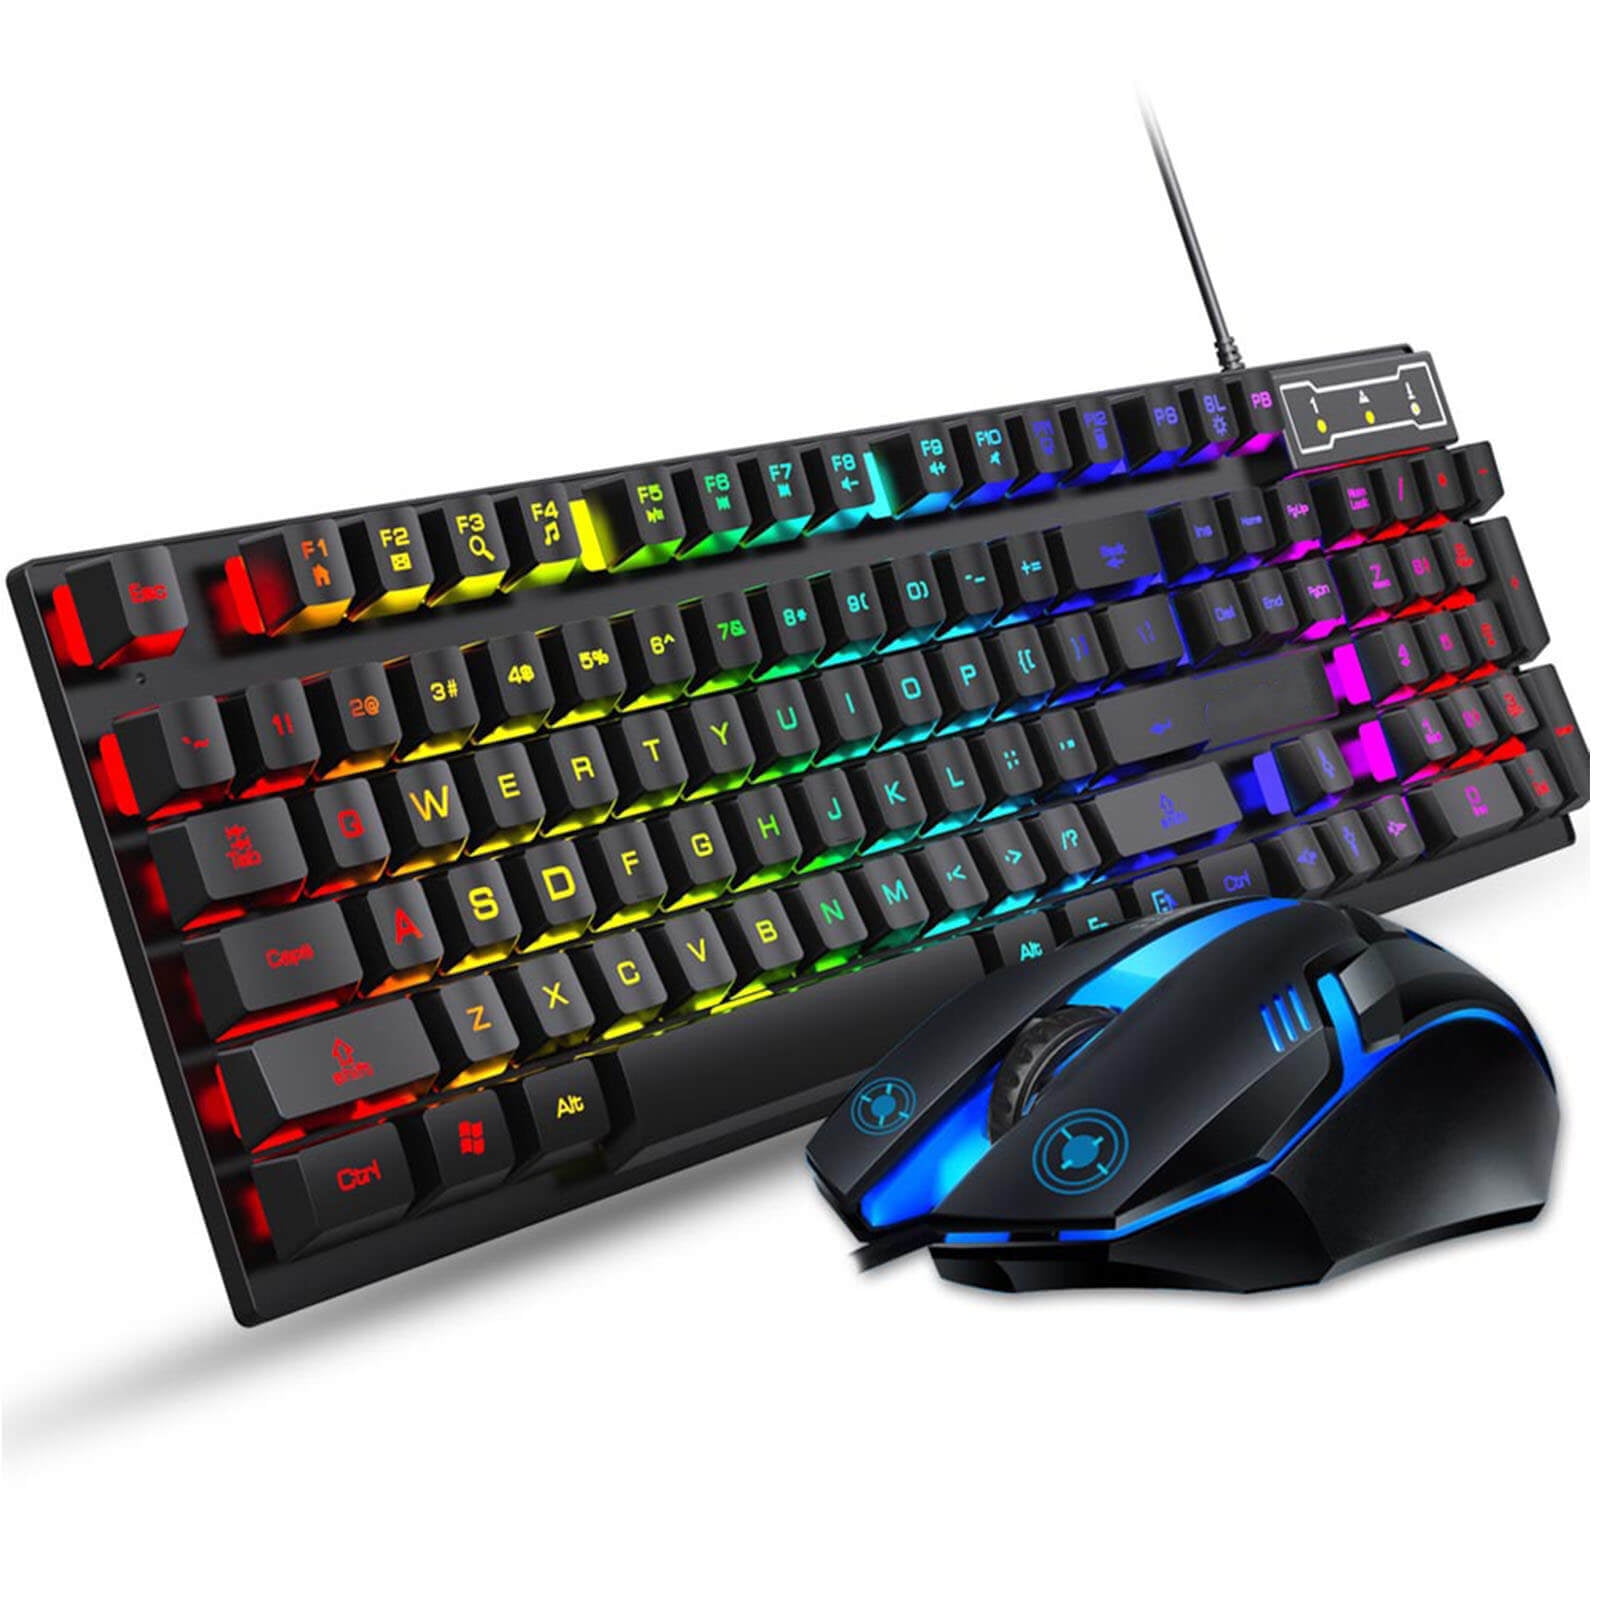 FOREV Keyboard and Mouse Set Combo, Wired RGB Backlit Computer Keyboard  with USB RGB Gaming Mouse Design for Windows PC Laptop Desktop